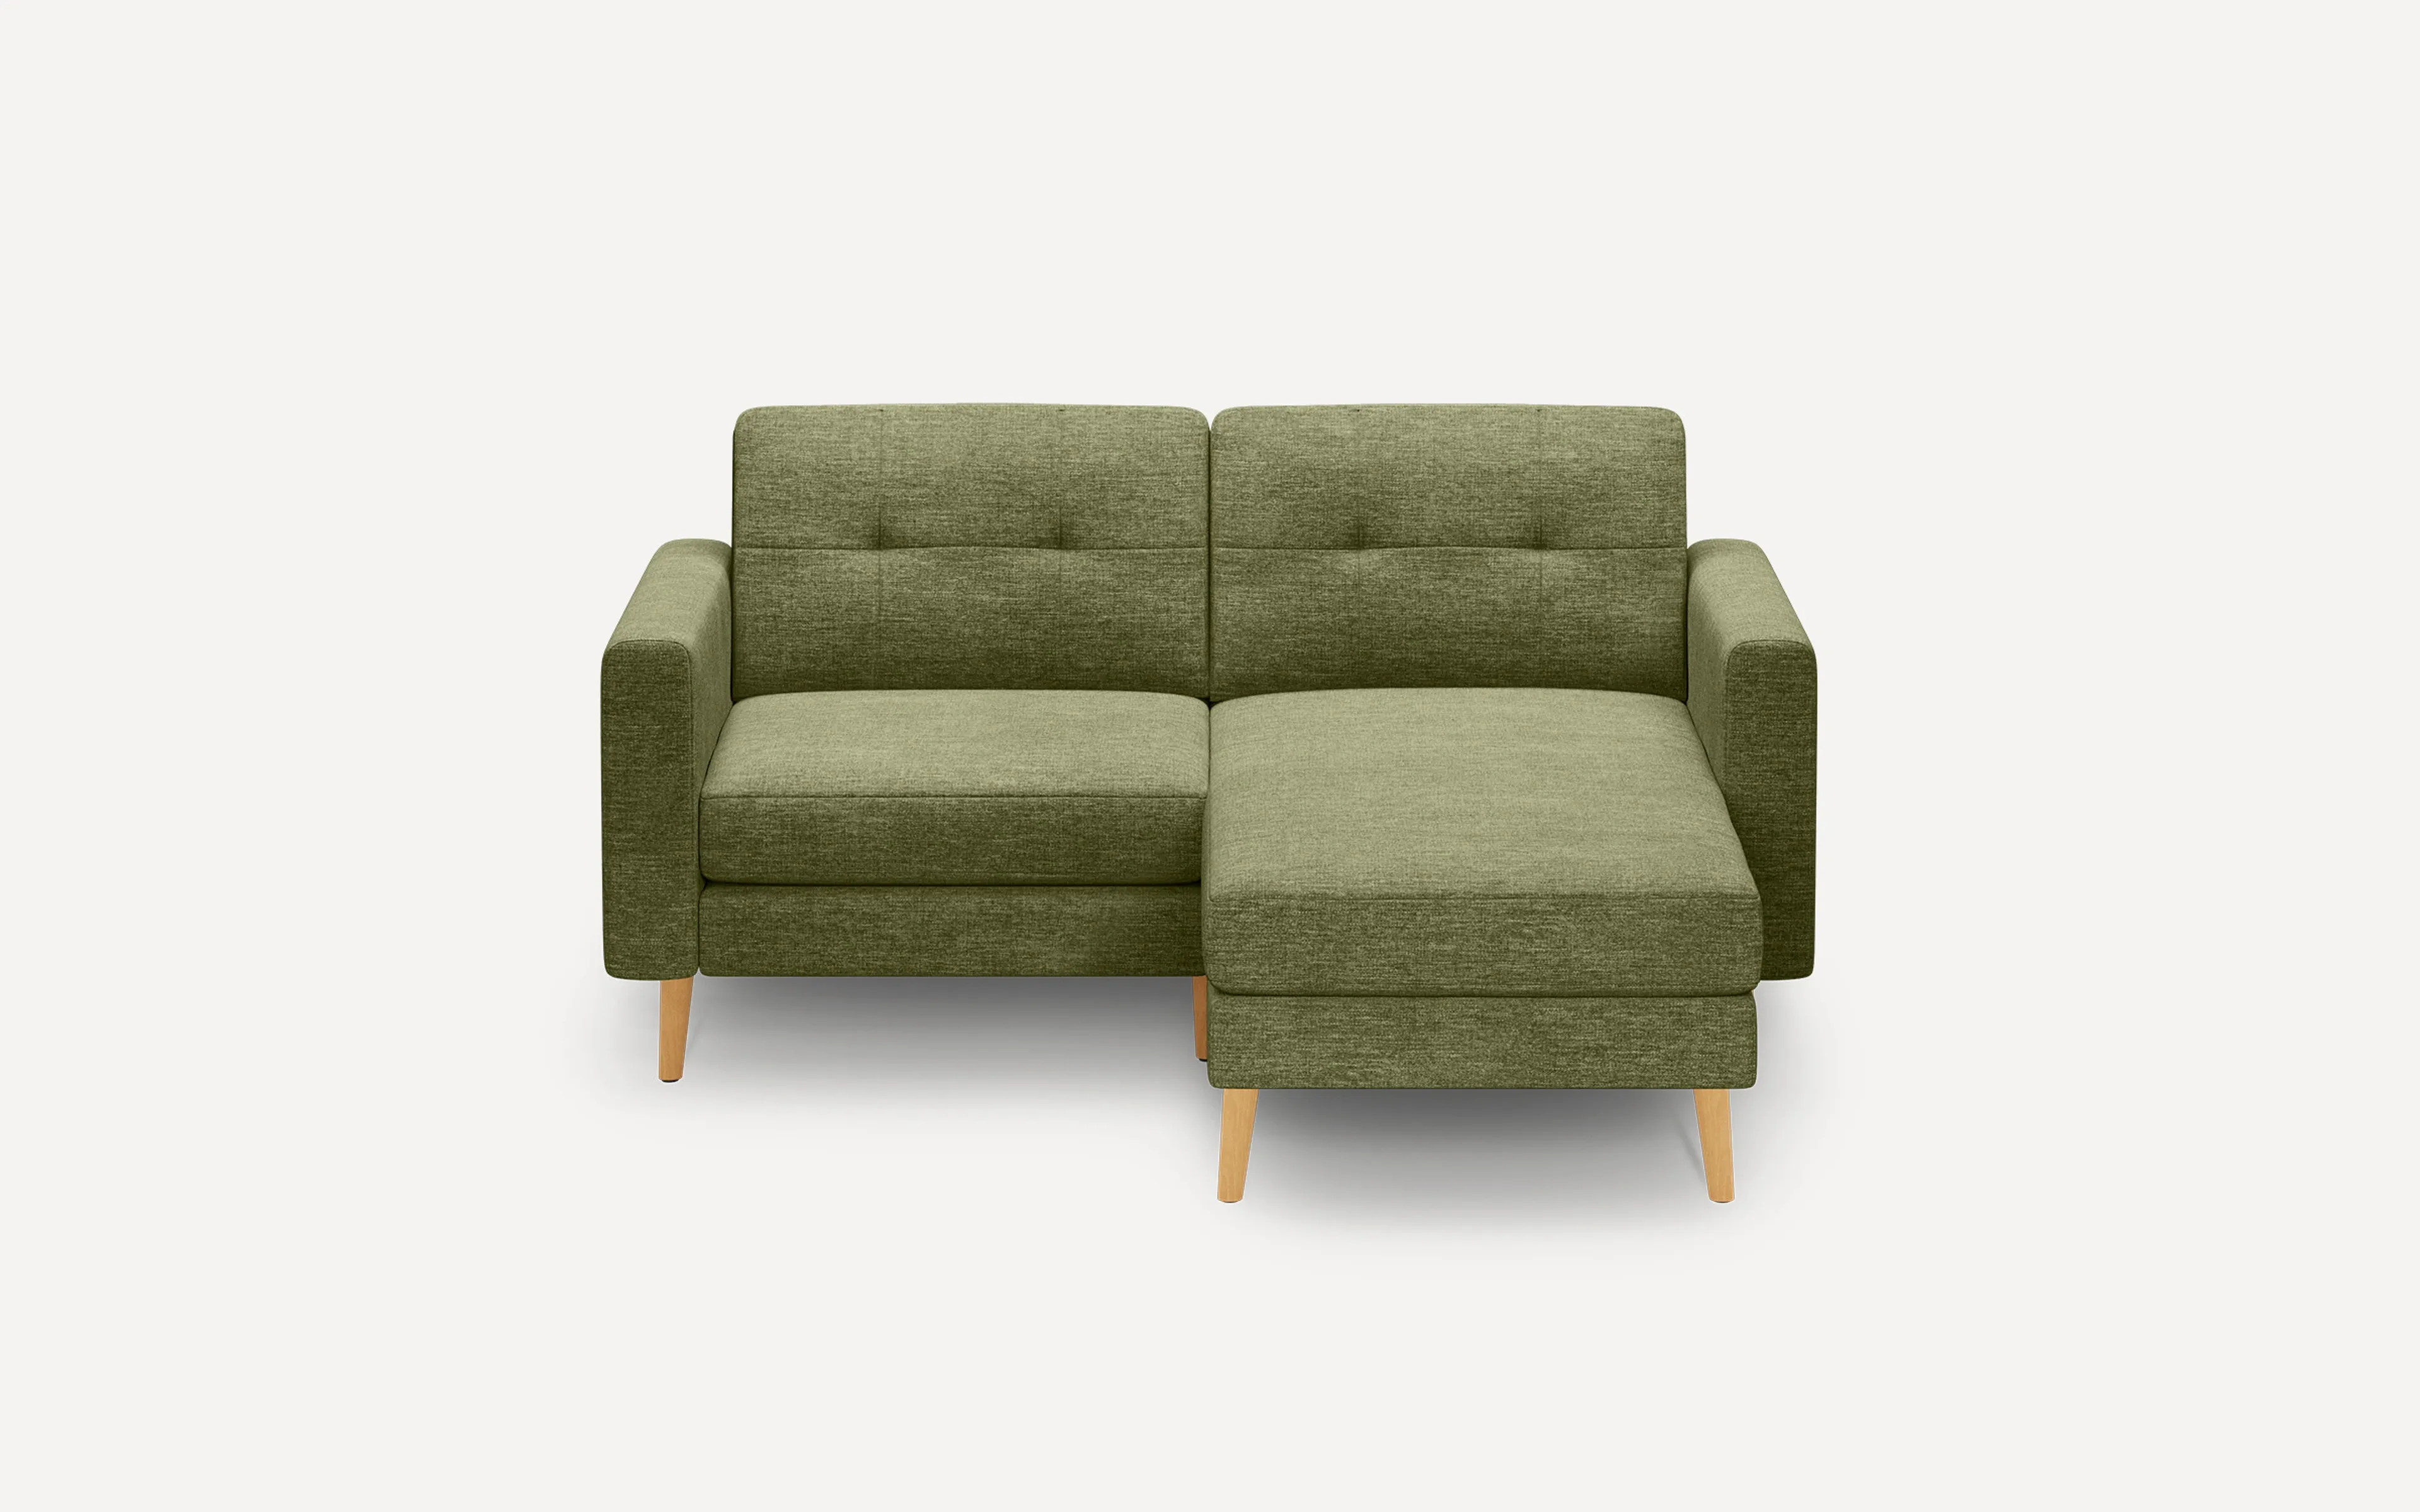 Original Nomad Chaise Loveseat in Moss Green Fabric